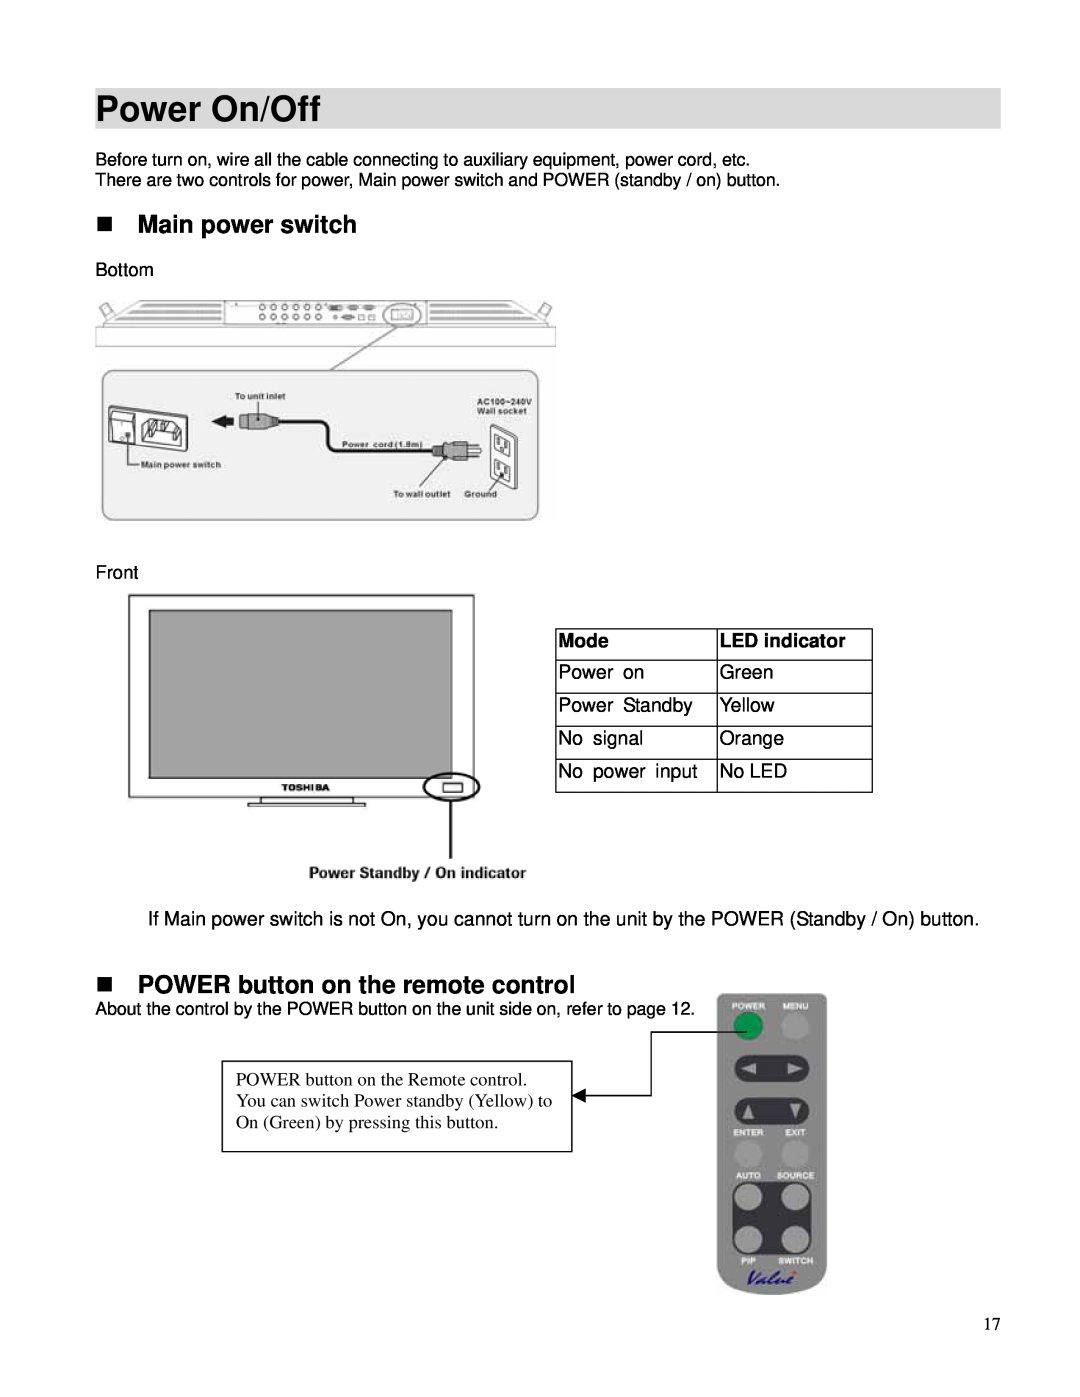 Toshiba P42LHA Power On/Off, Main power switch, POWER button on the remote control, Mode, LED indicator, Bottom Front 